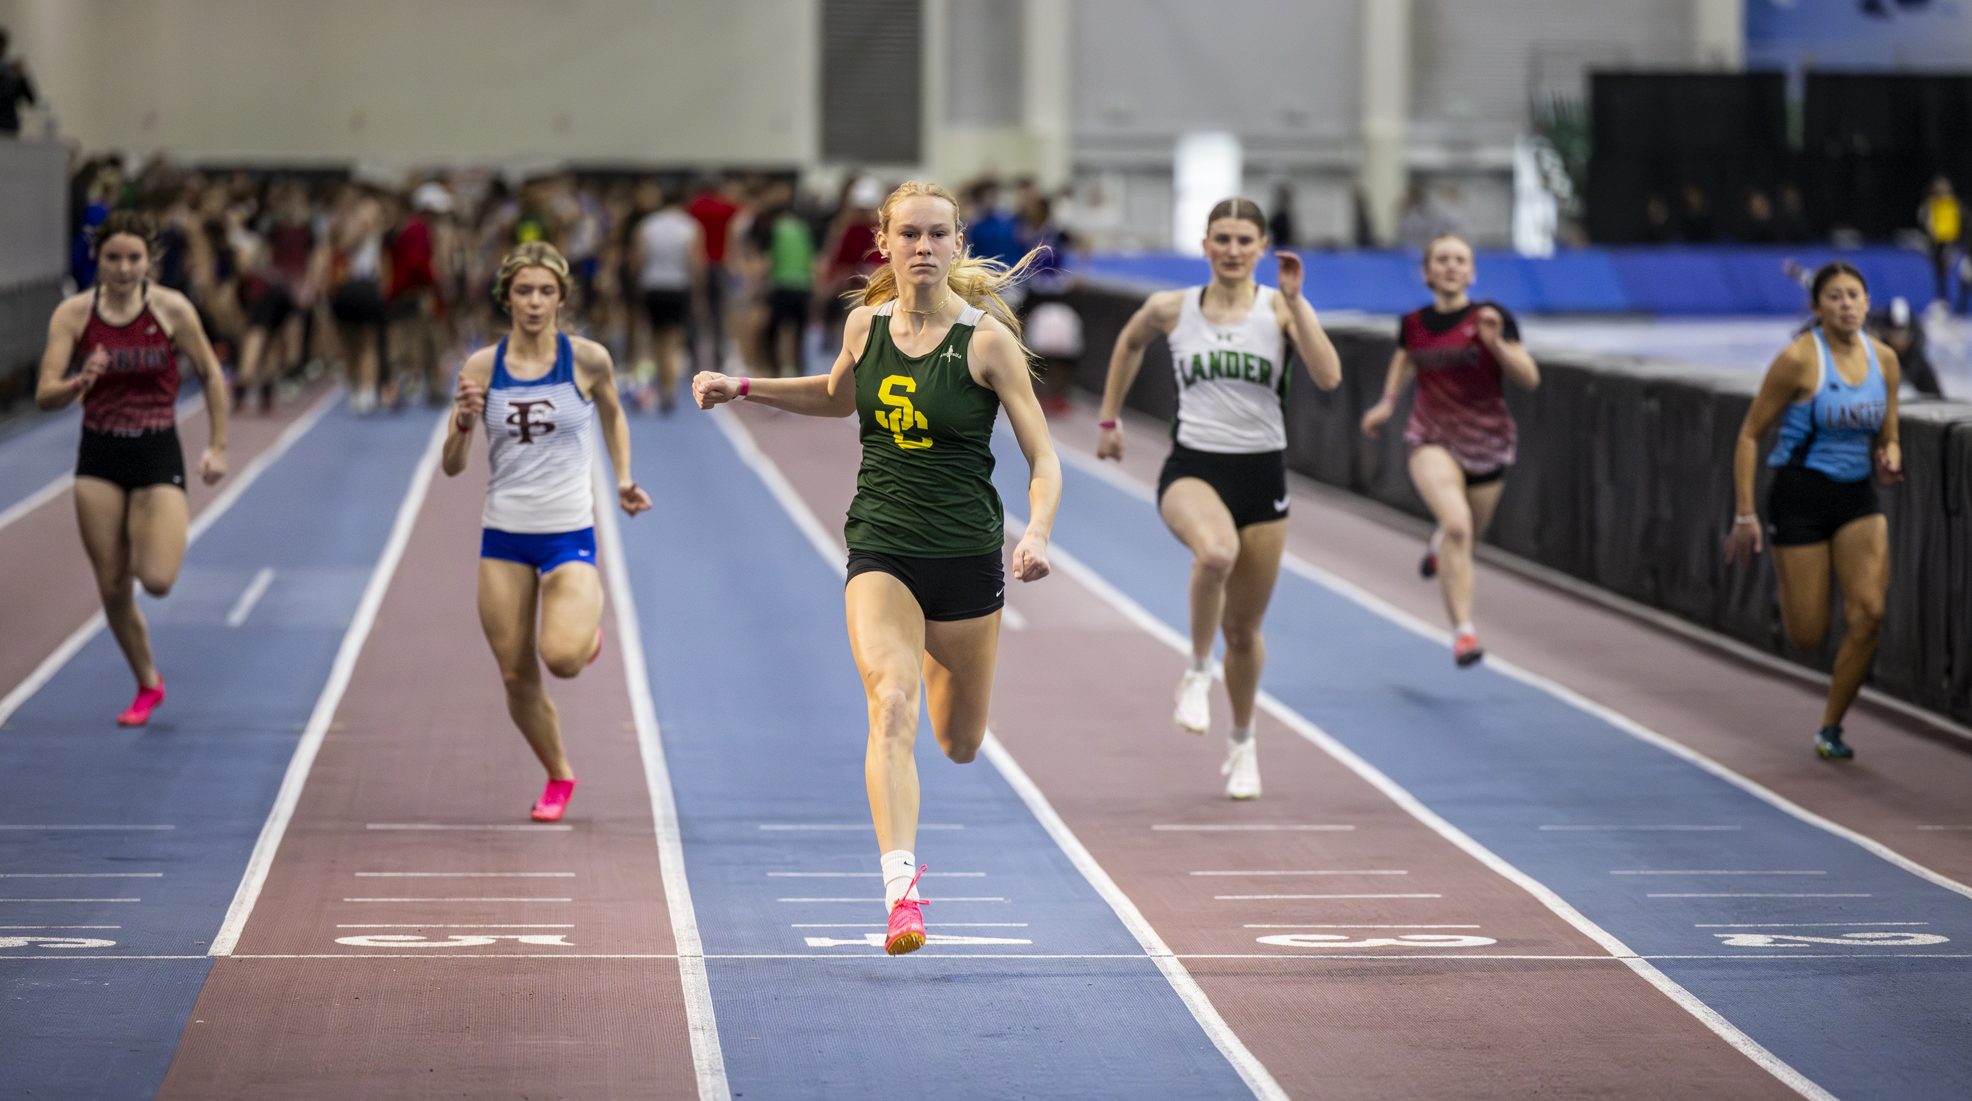 snow-canyon-warriors,-other-local-athletes-saw-success-during-indoor-track-season